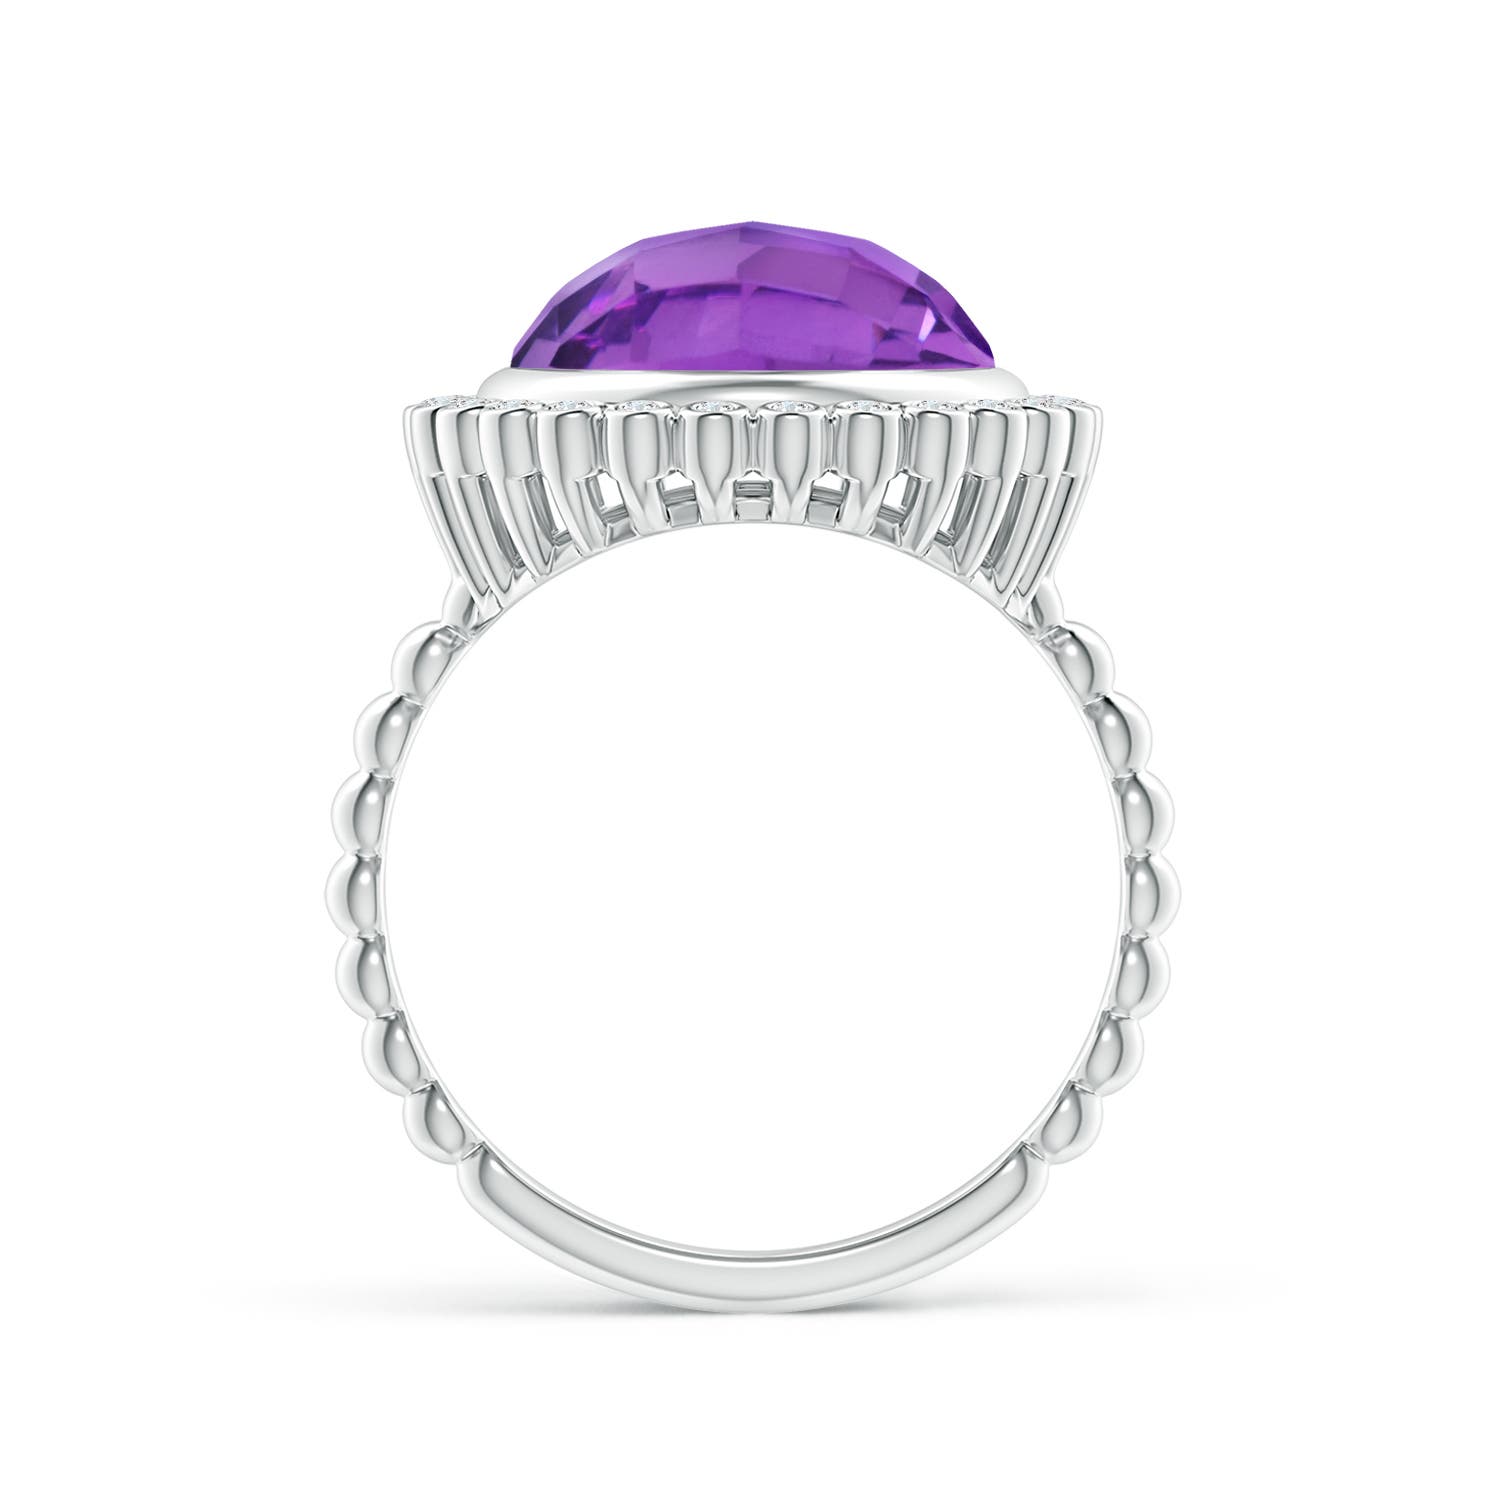 AA - Amethyst / 5.01 CT / 14 KT White Gold